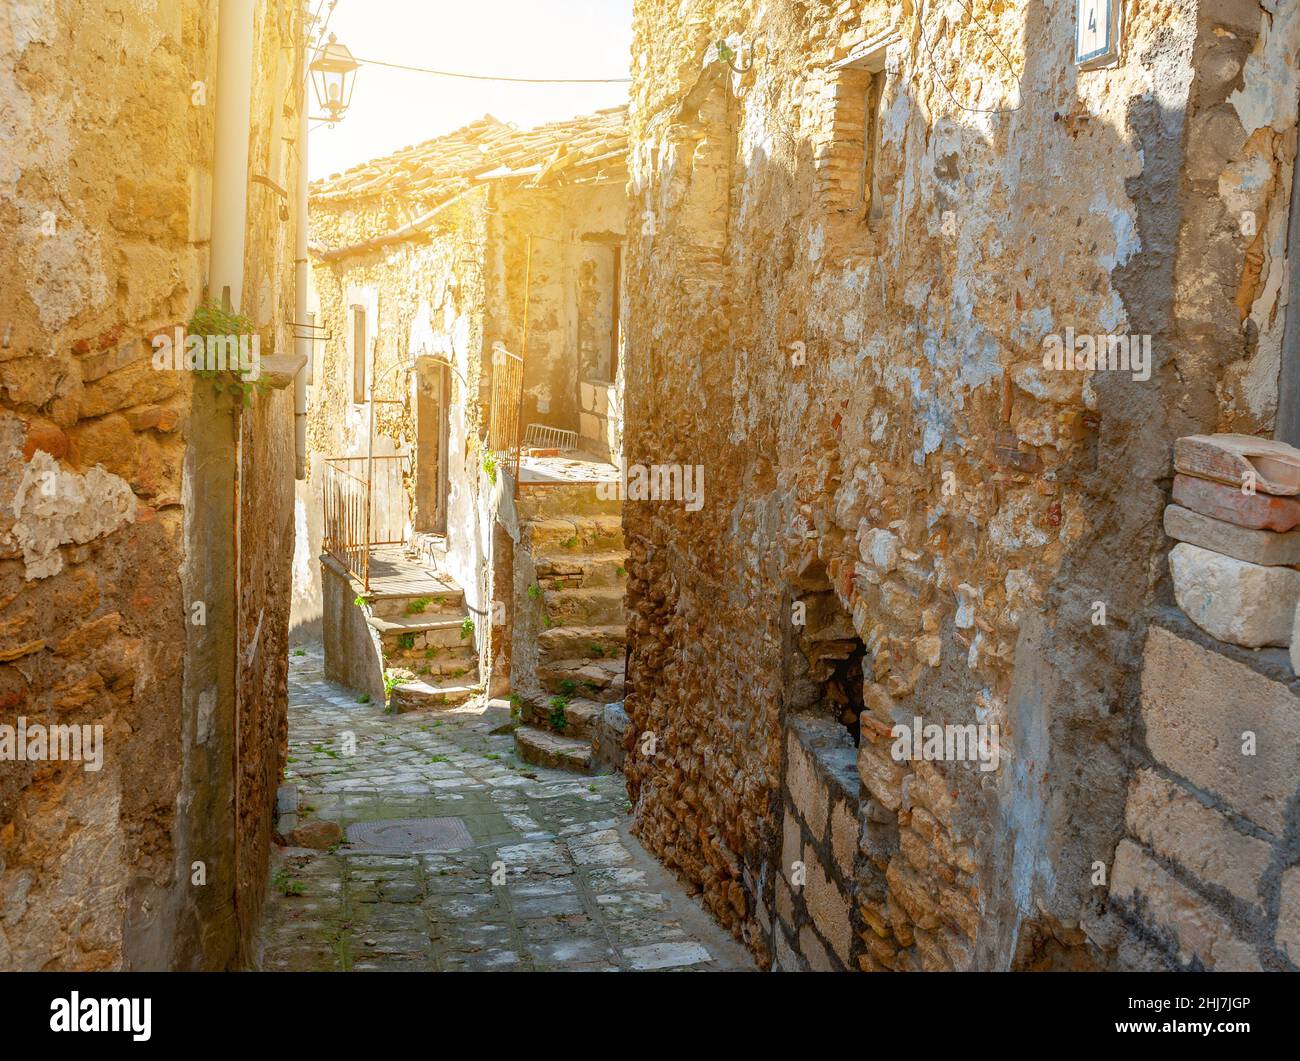 A street in an old Italian medieval city. Sights of Europe. Stock Photo